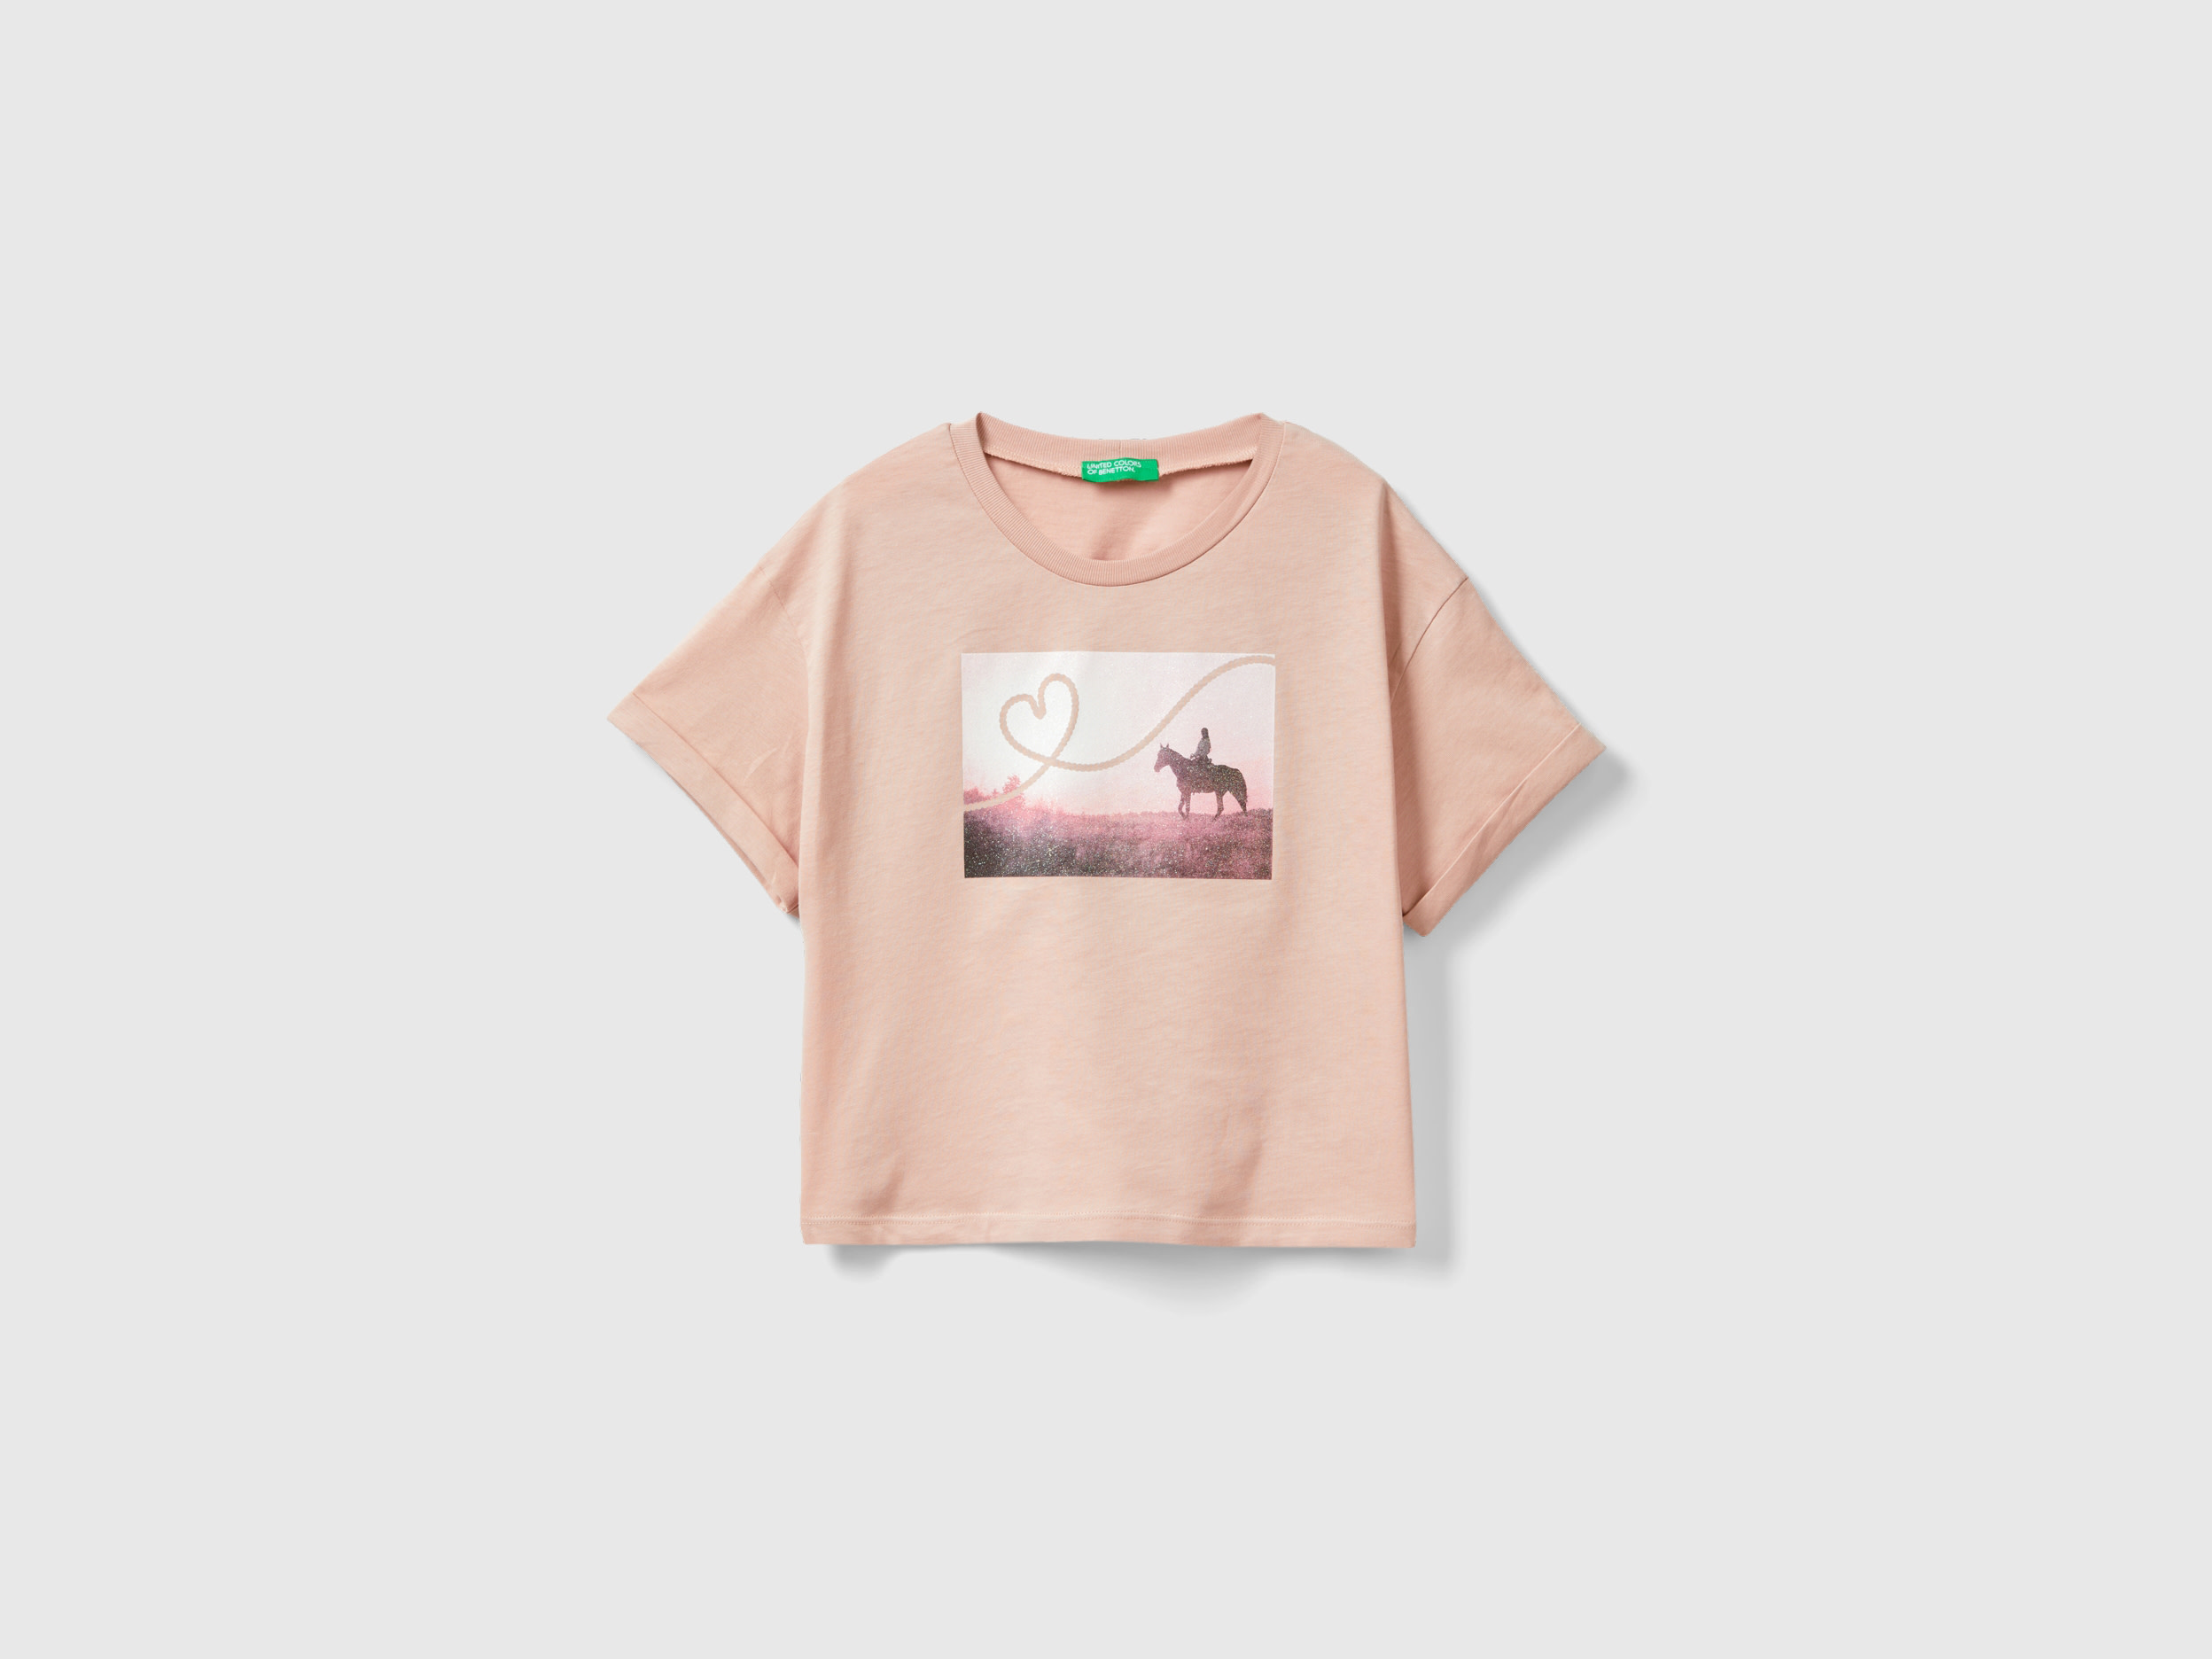 Image of Benetton, T-shirt With Photographic Horse Print, size 2XL, Nude, Kids